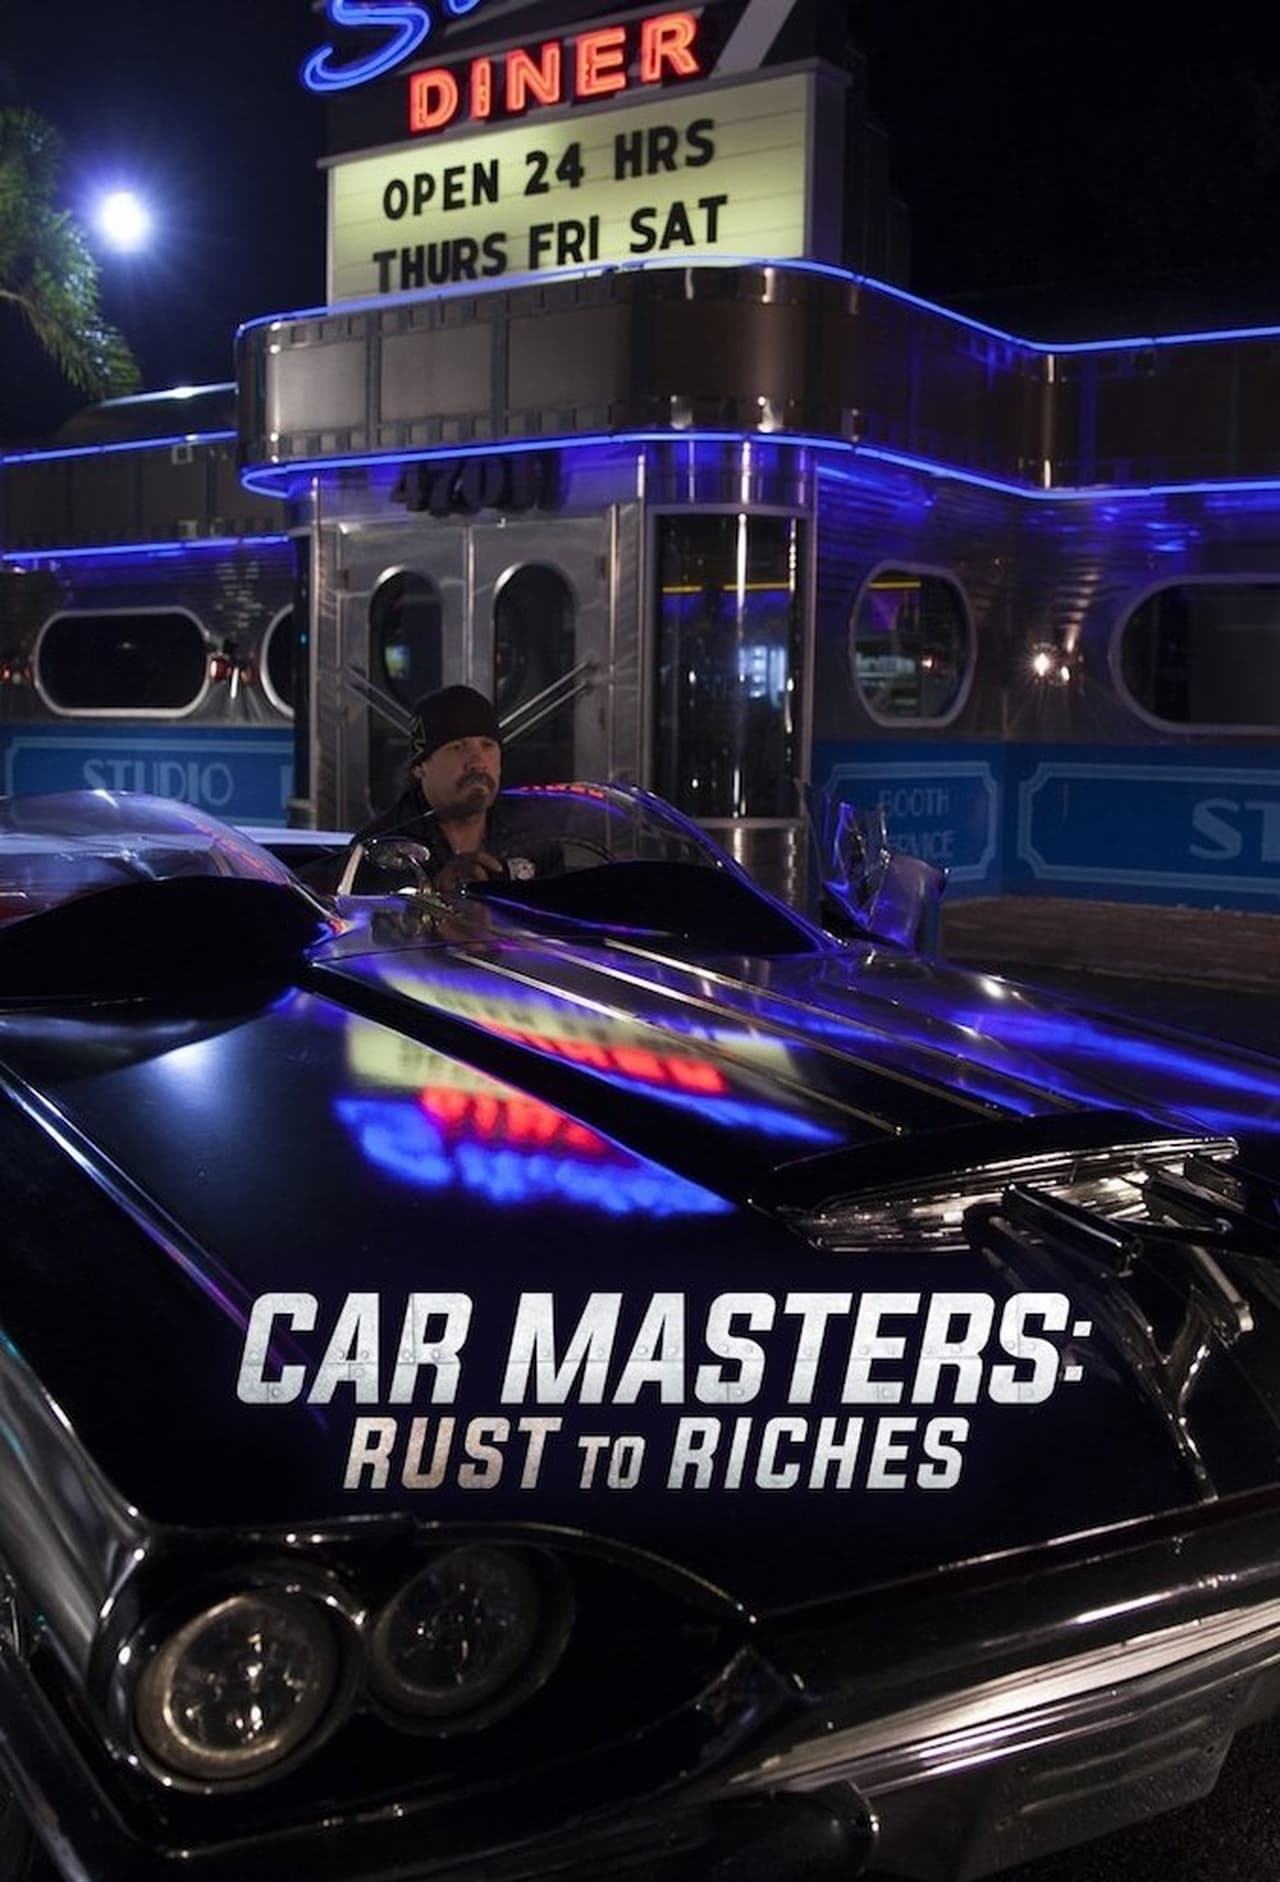 Car Masters: Rust to Riches (2020) S2 EP01&EP08 640Kbps 23.976Fps 48Khz 5.1Ch DD+ NF E-AC3 Turkish Audio TAC